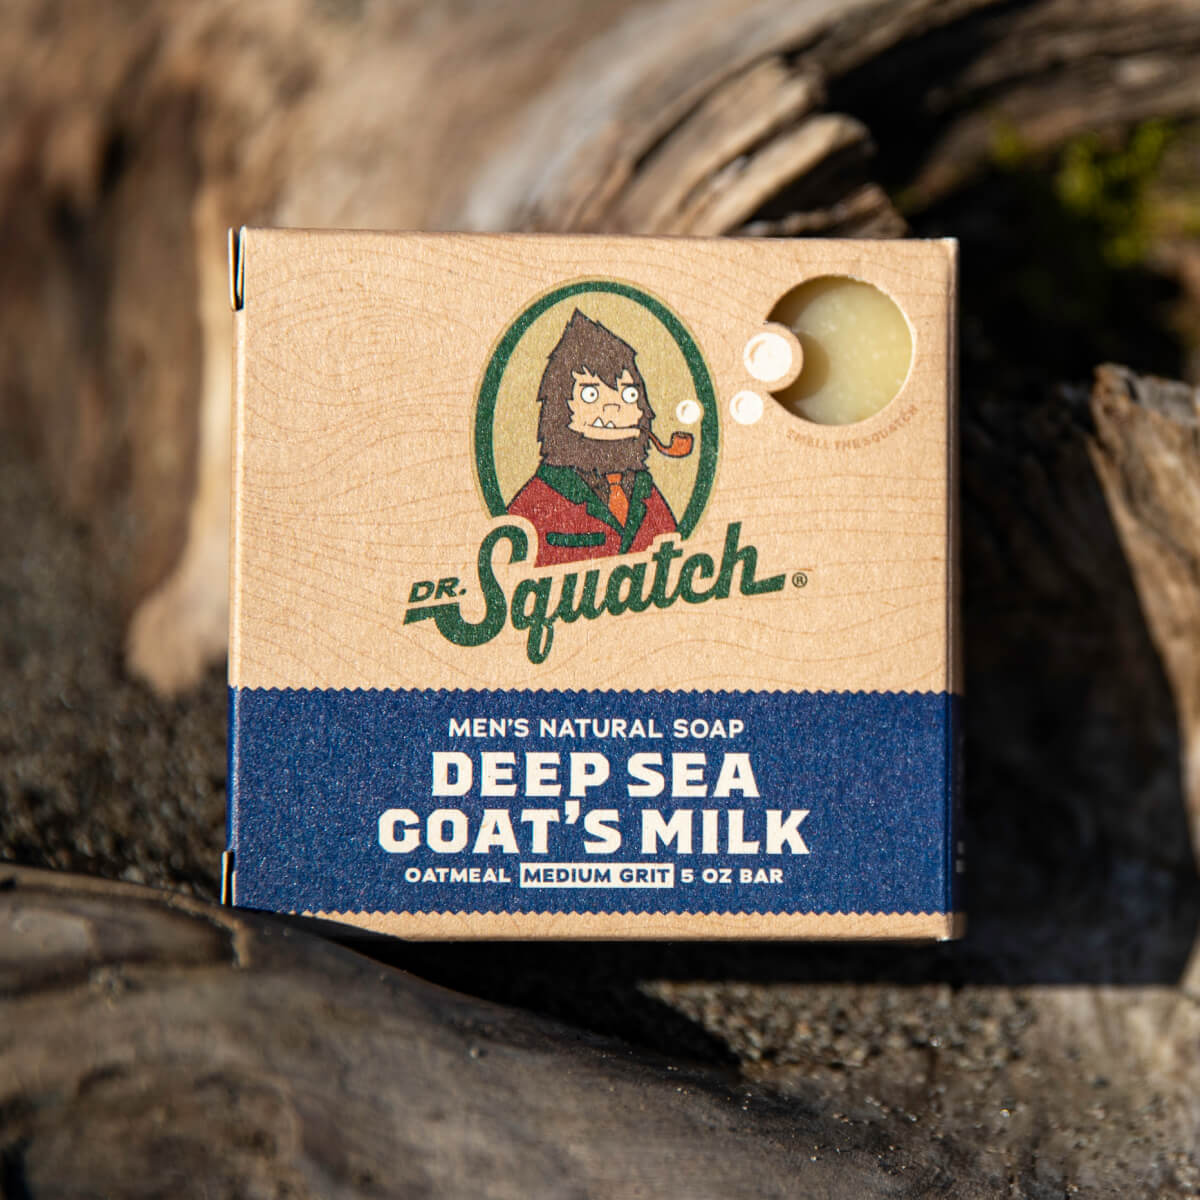 Dr. Squatch - Natural Soap Sundays 💪 Today we're spotlighting the